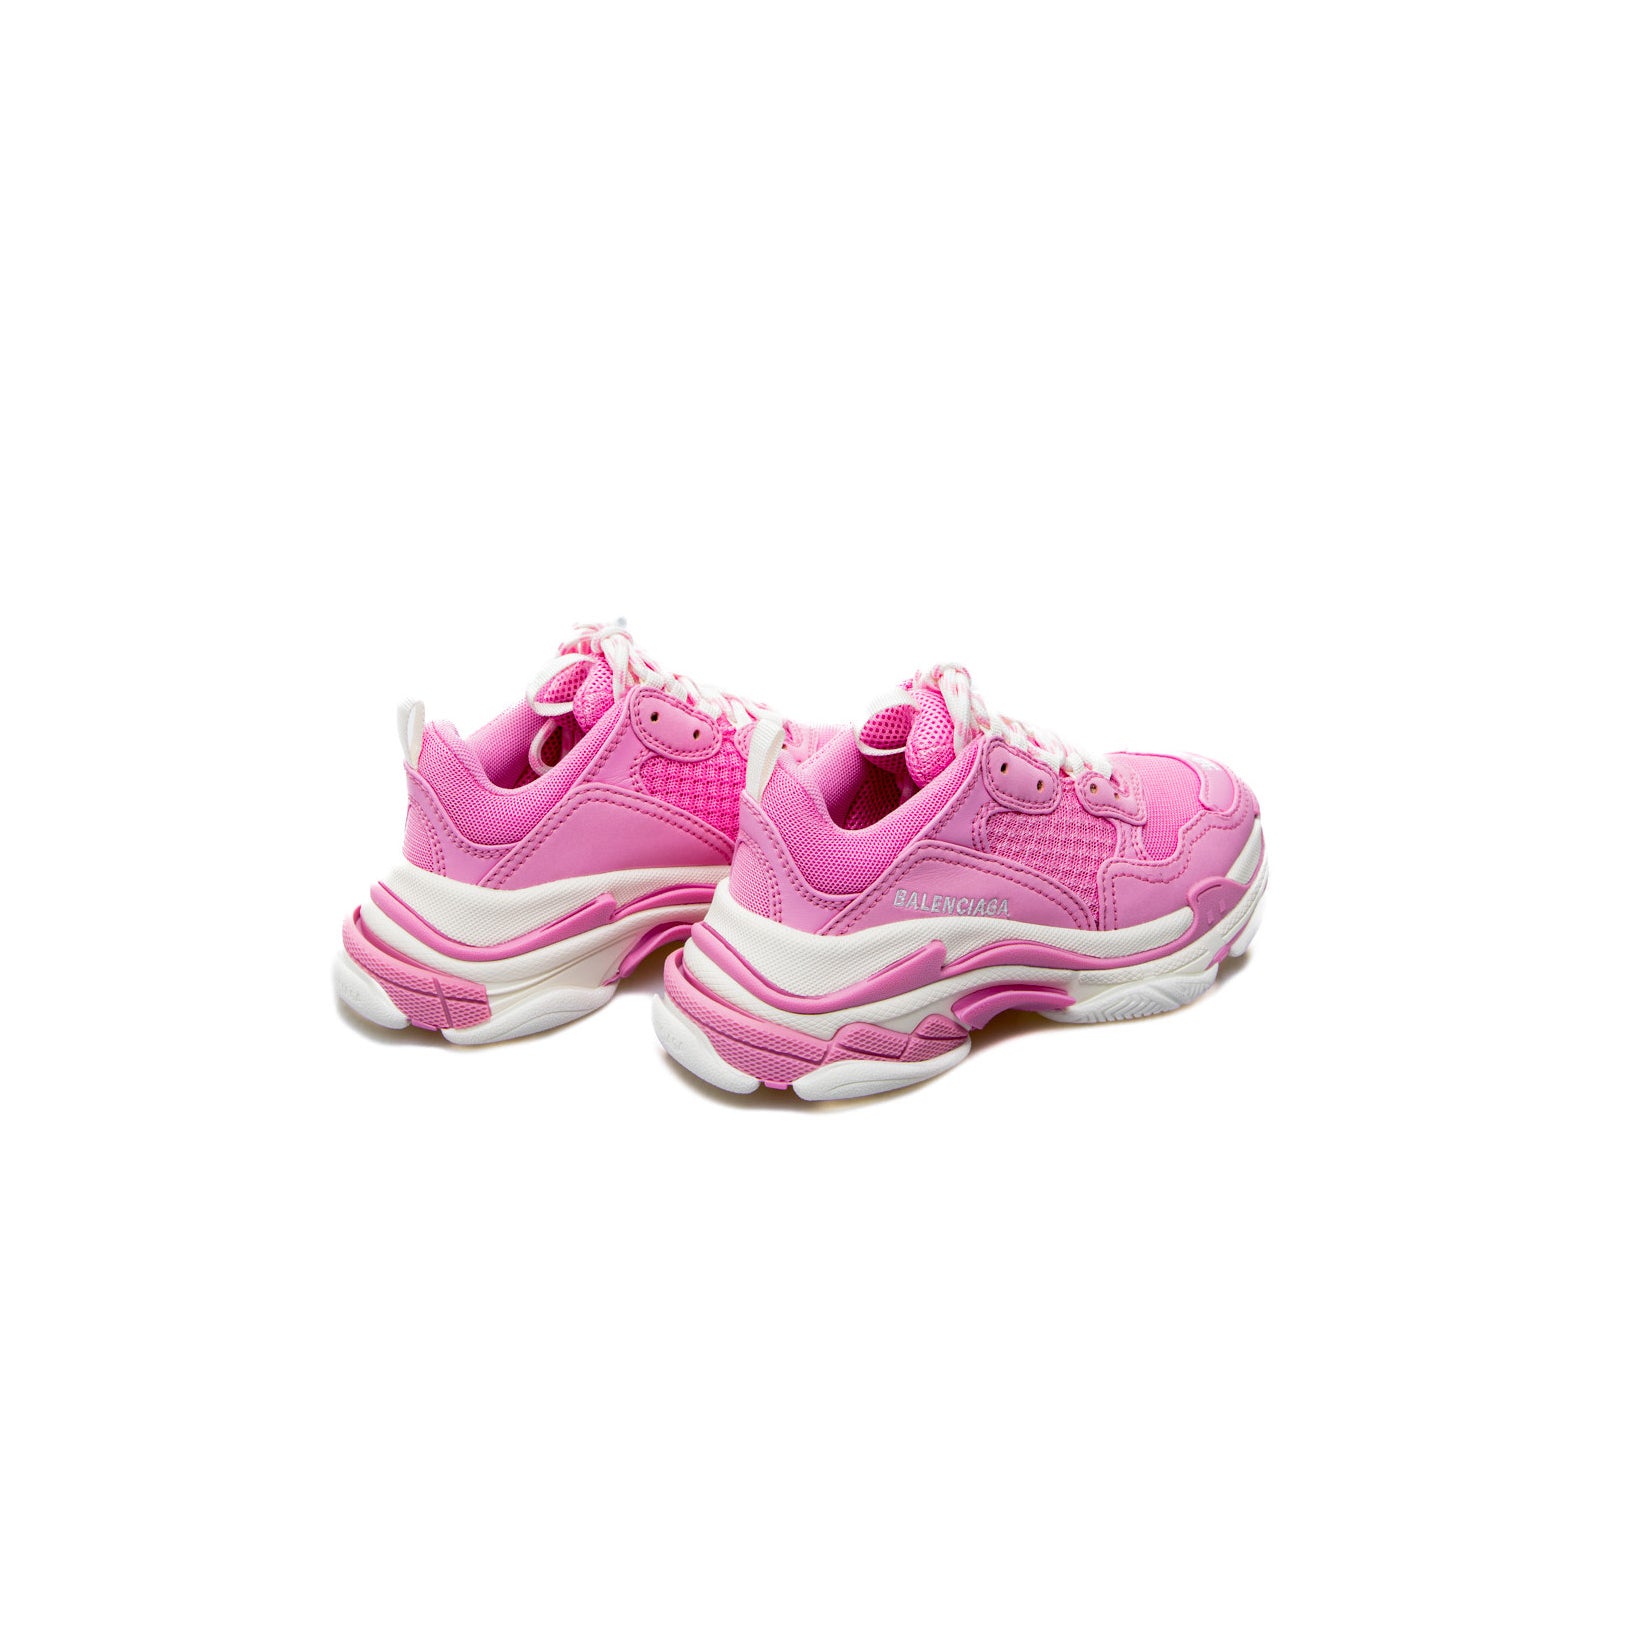 Boys & Girls Pink Shoes